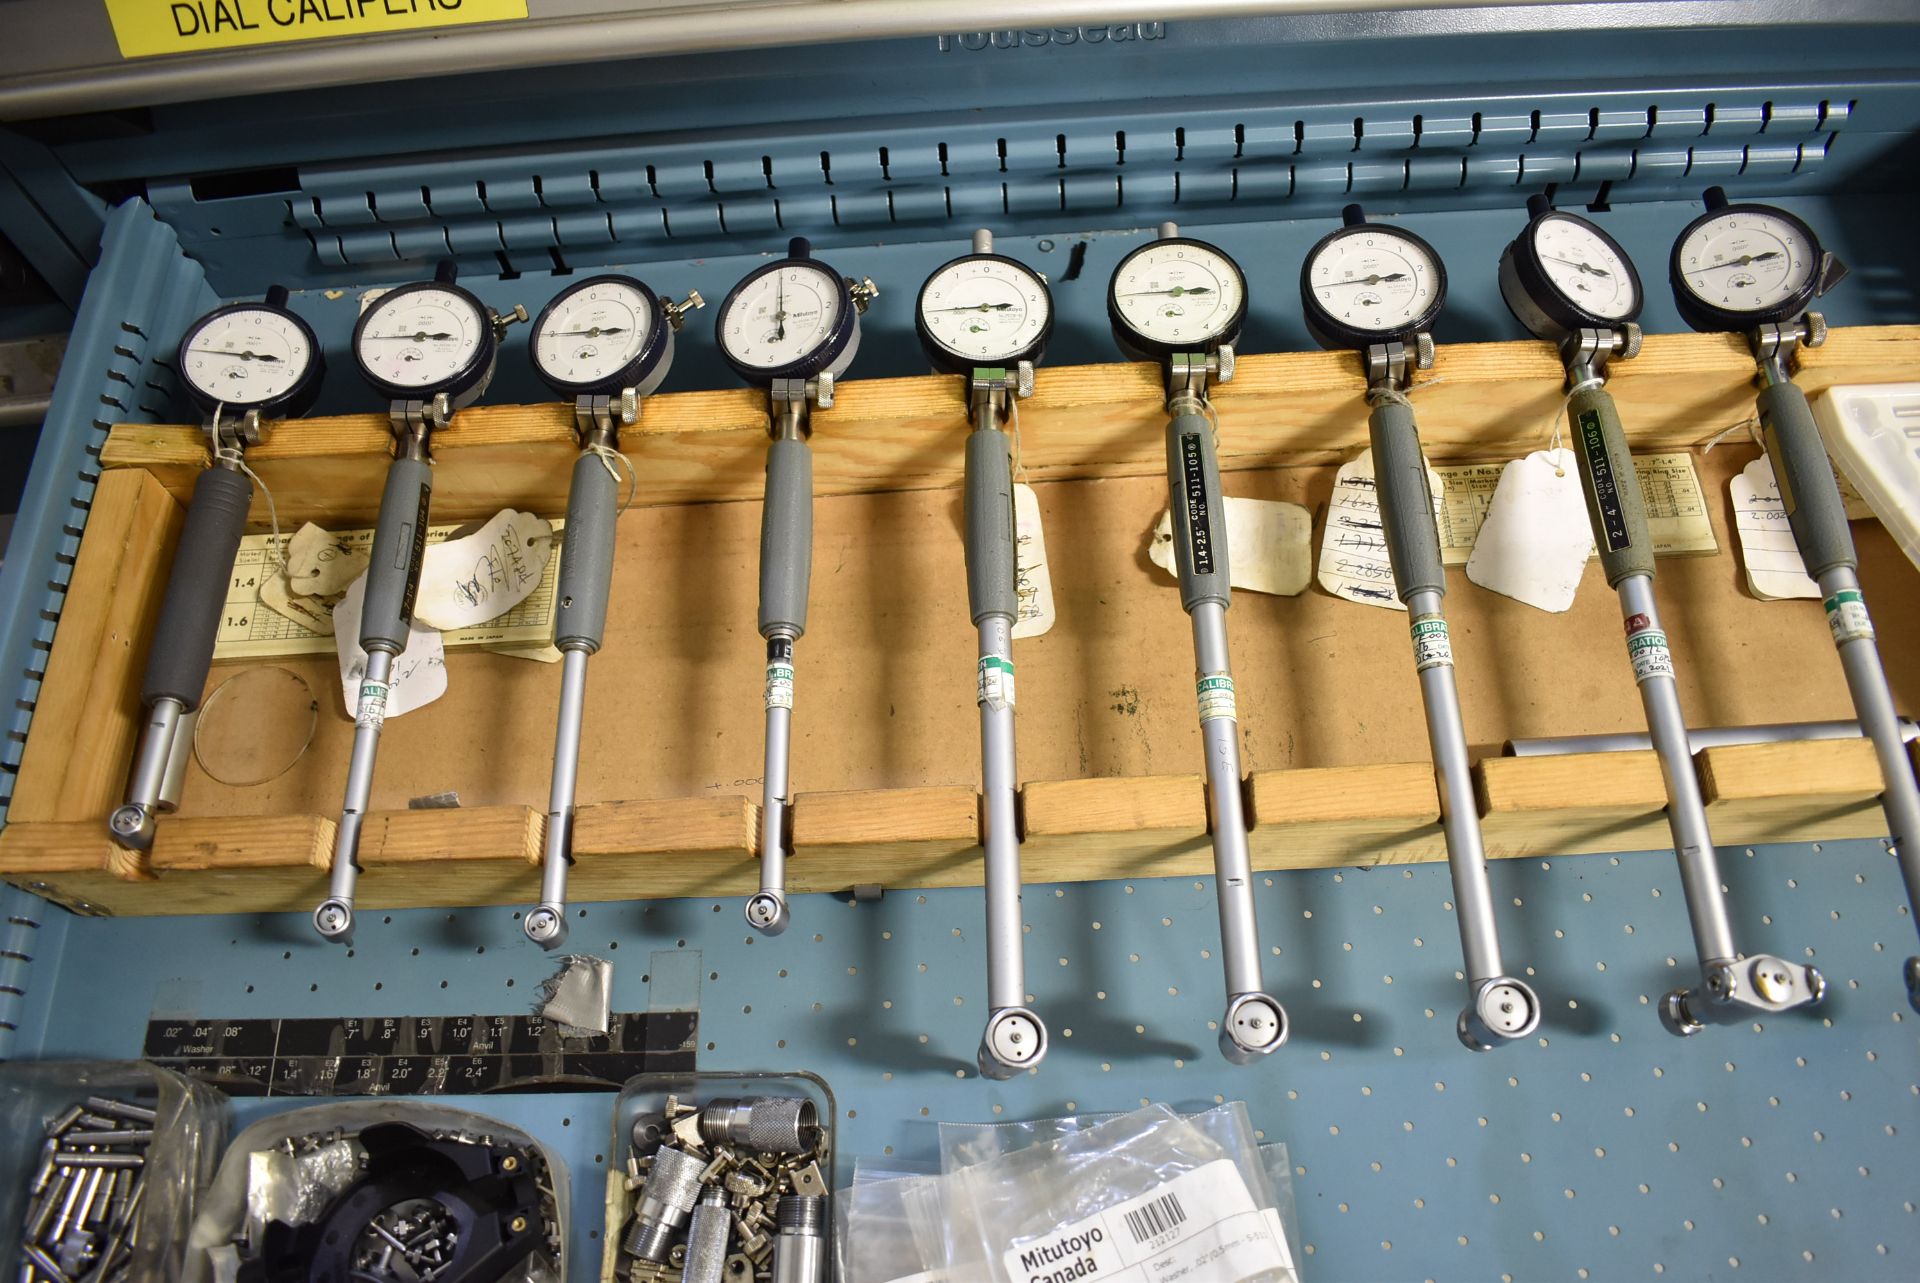 LOT/ CONTENTS OF DRAWER CONSISTING OF MITUTOYO BORE GAUGES - Image 2 of 3